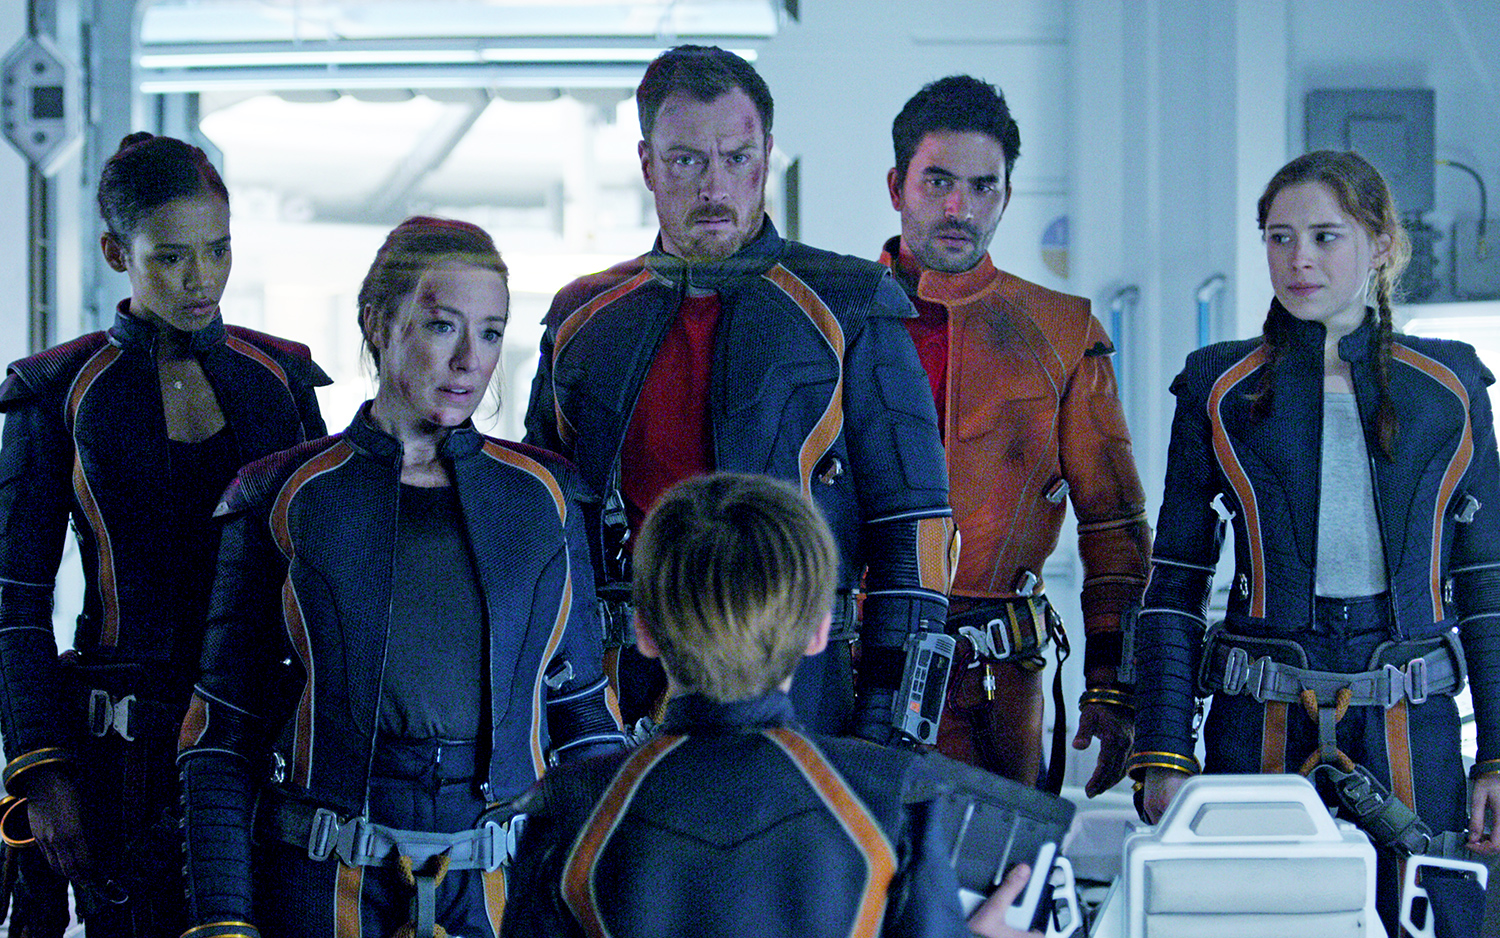 Lost in Space Season 3 Cast and Release Date